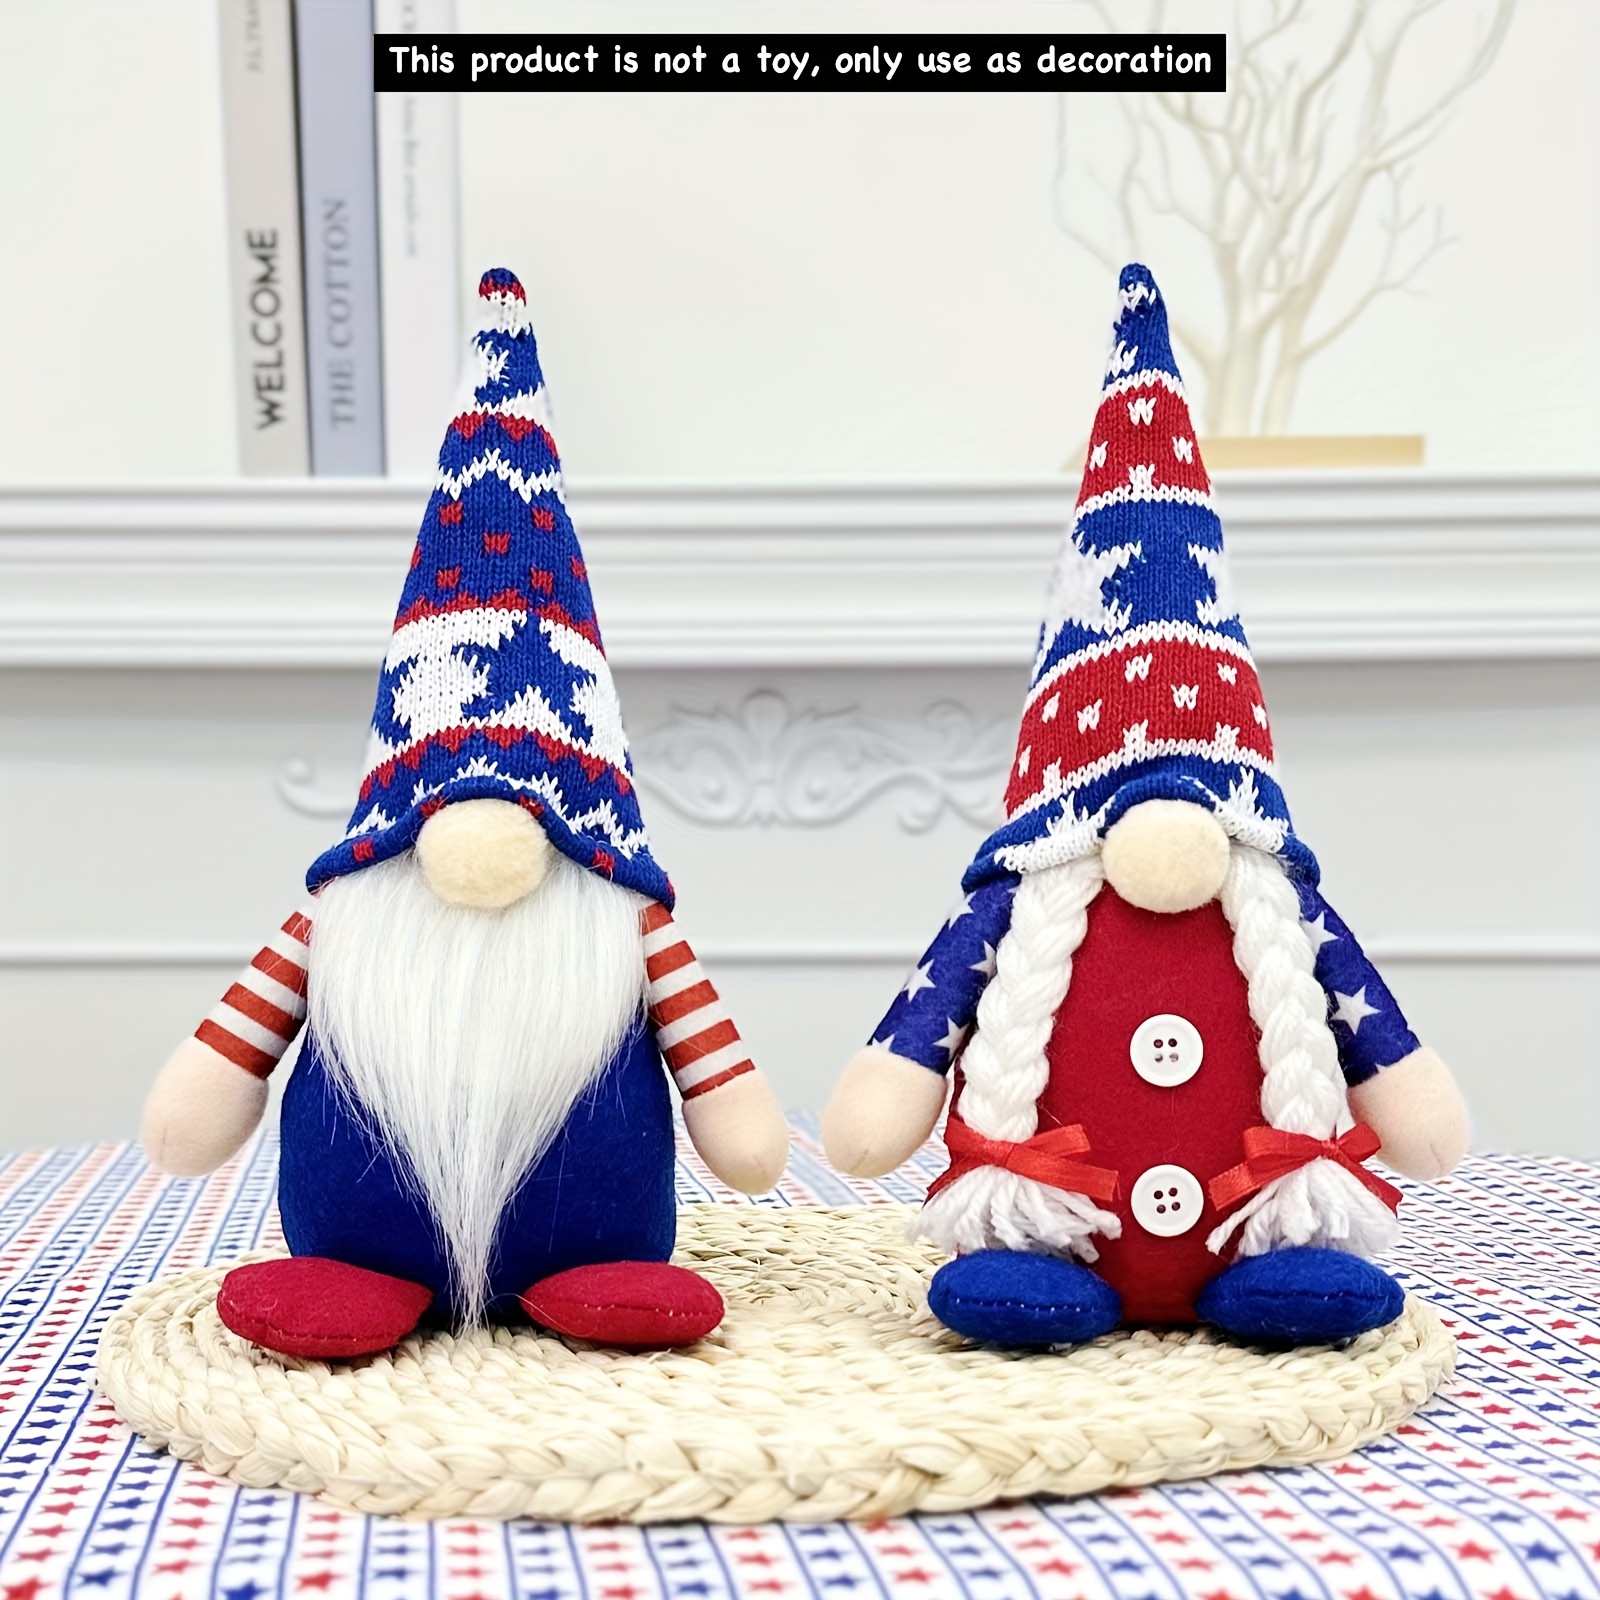 

2pcs Patriotic Gnome Plush Dolls, Red & Blue Knit Hat Gnomes Doll, Star-spangled Decor, Festive Indoor Decoration, Polyester Material, Independence Day, 4th Of July Decor